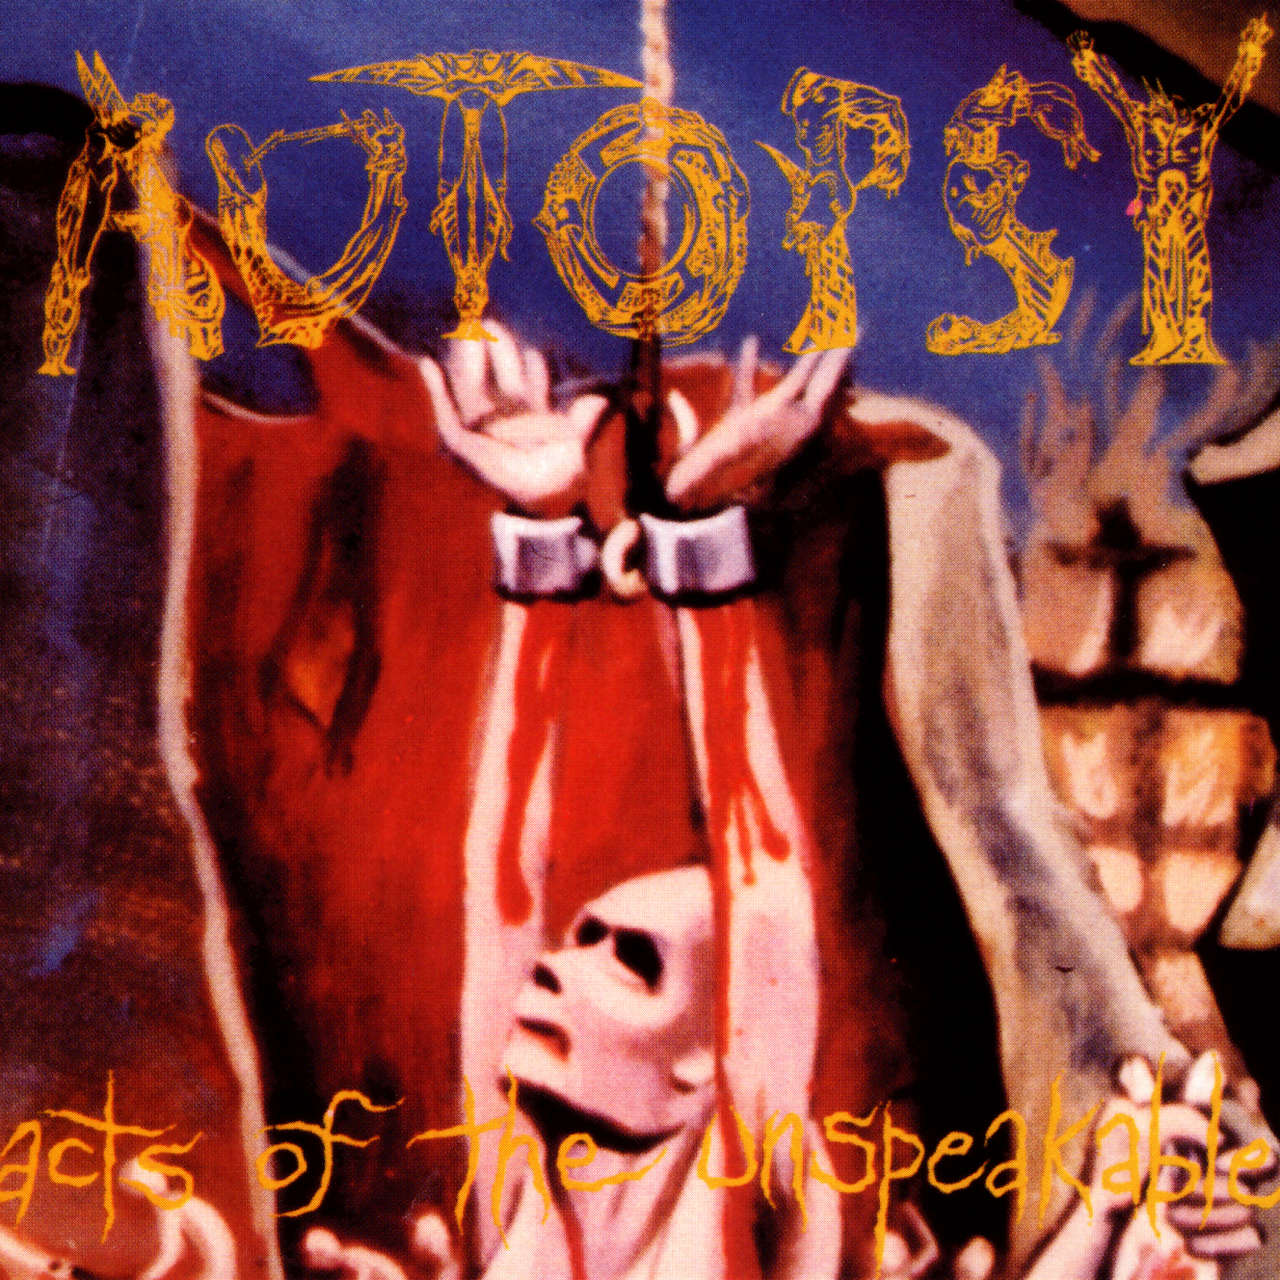 Autopsy - Acts of the Unspeakable (2003 Reissue) (CD)